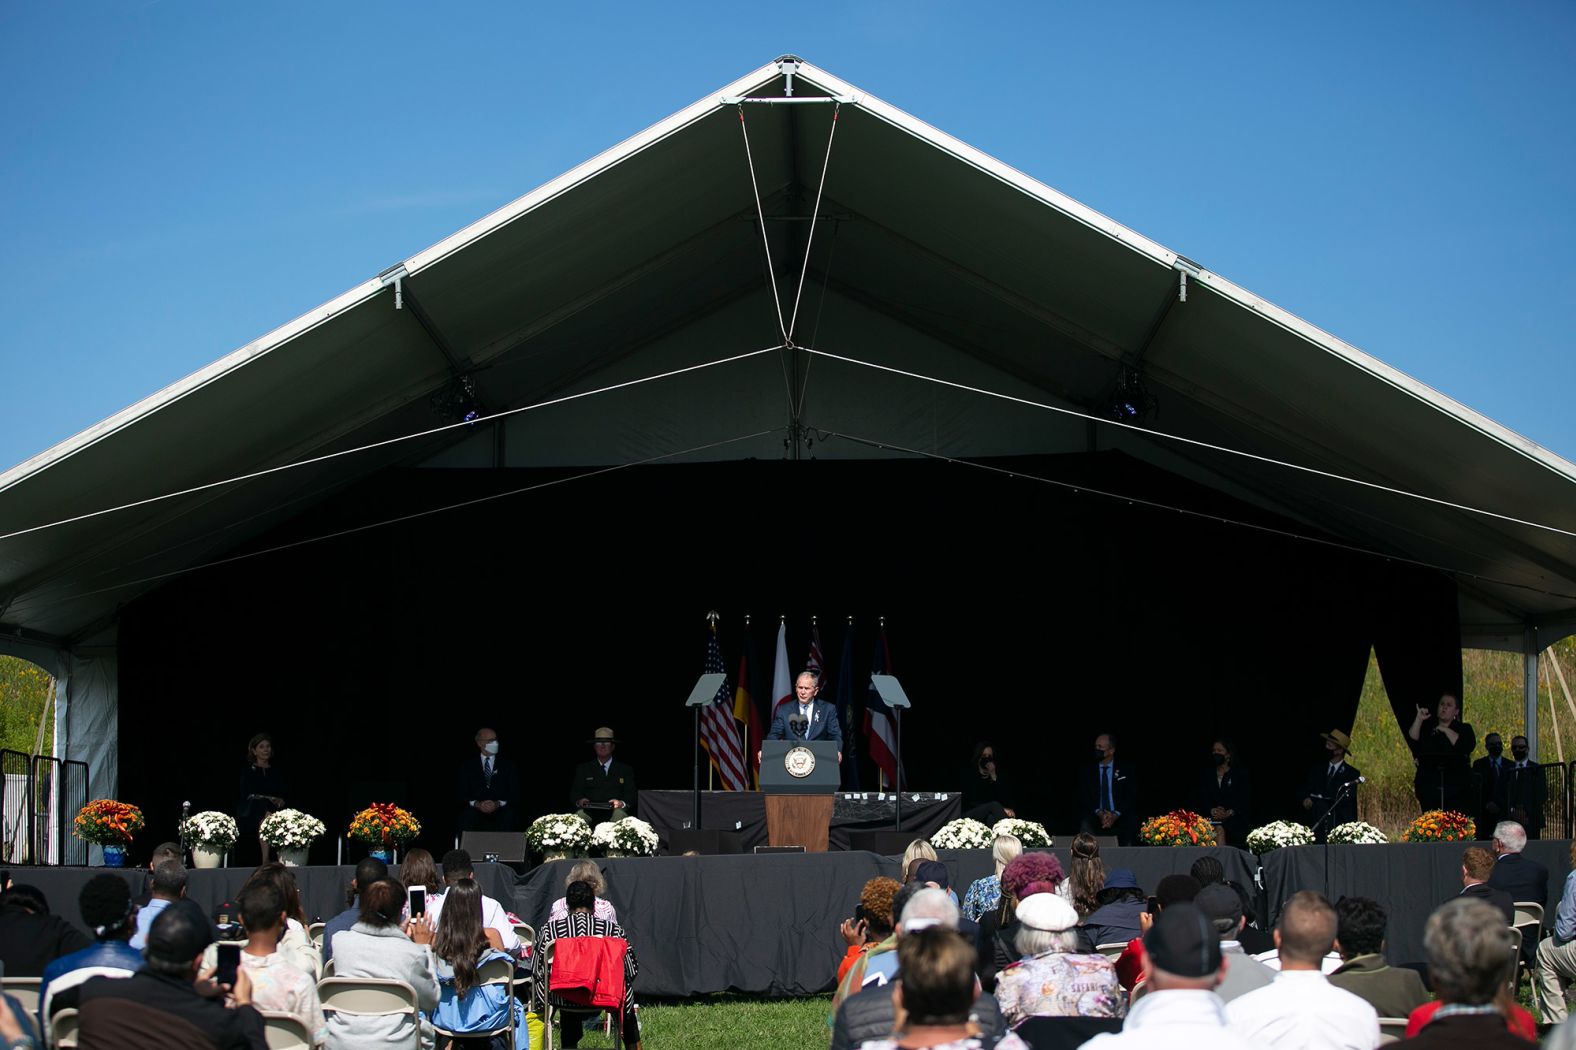 Former President George W. Bush speaks at the memorial ceremony in Shanksville. "On America's day of trial and grief, I saw millions of people instinctively grab for a neighbor's hand and rally to the cause of one another. That is the America I know," Bush said.